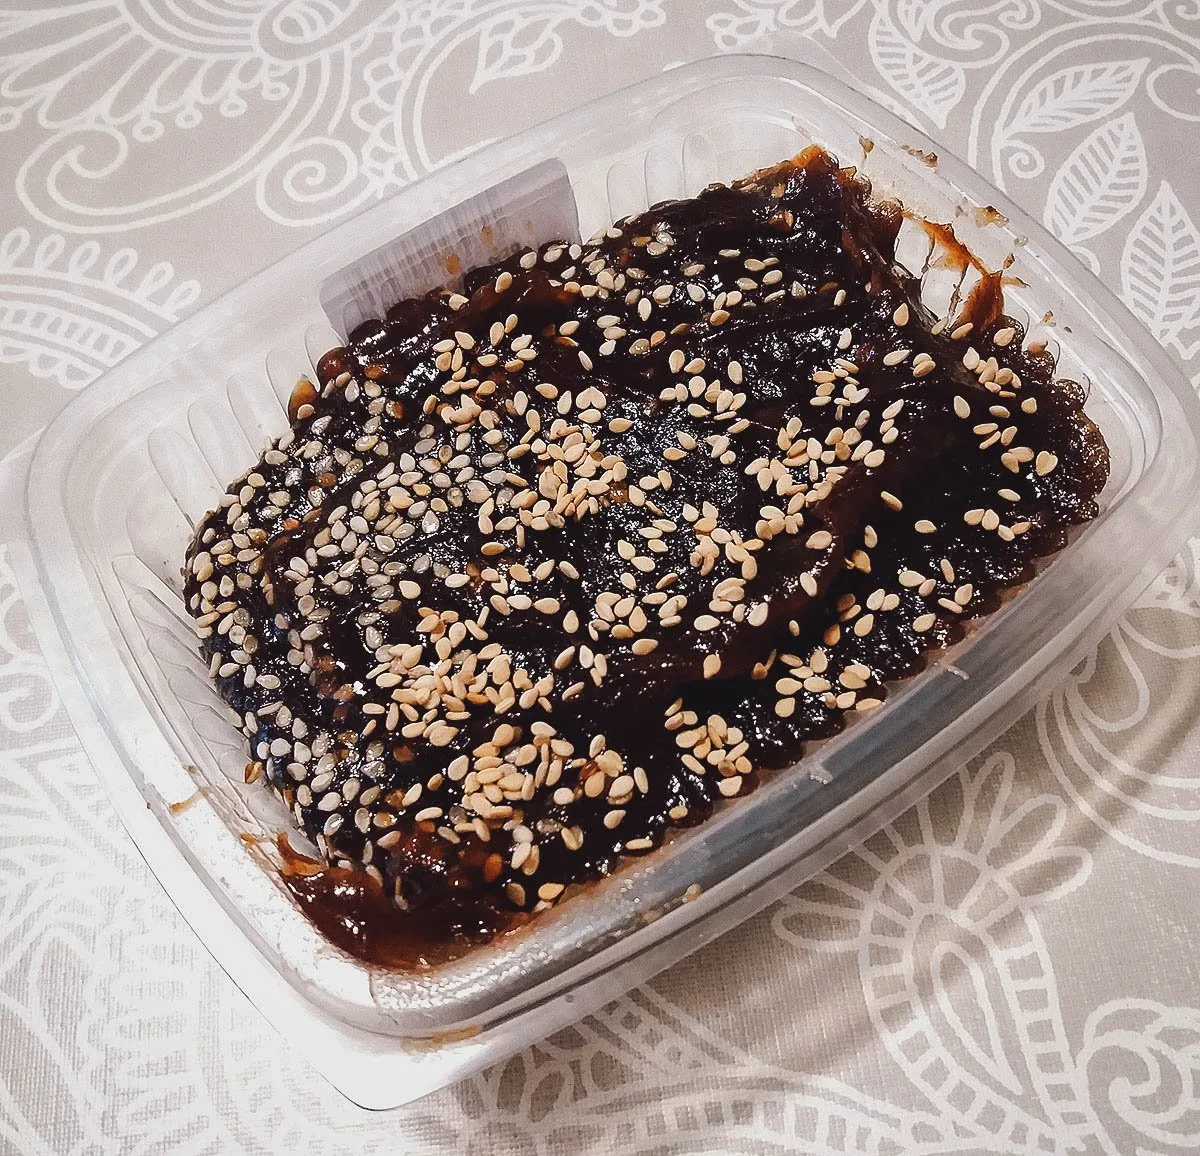 Frejol colado, a Peruvian sweetened black bean dessert topped with toasted sesame seeds